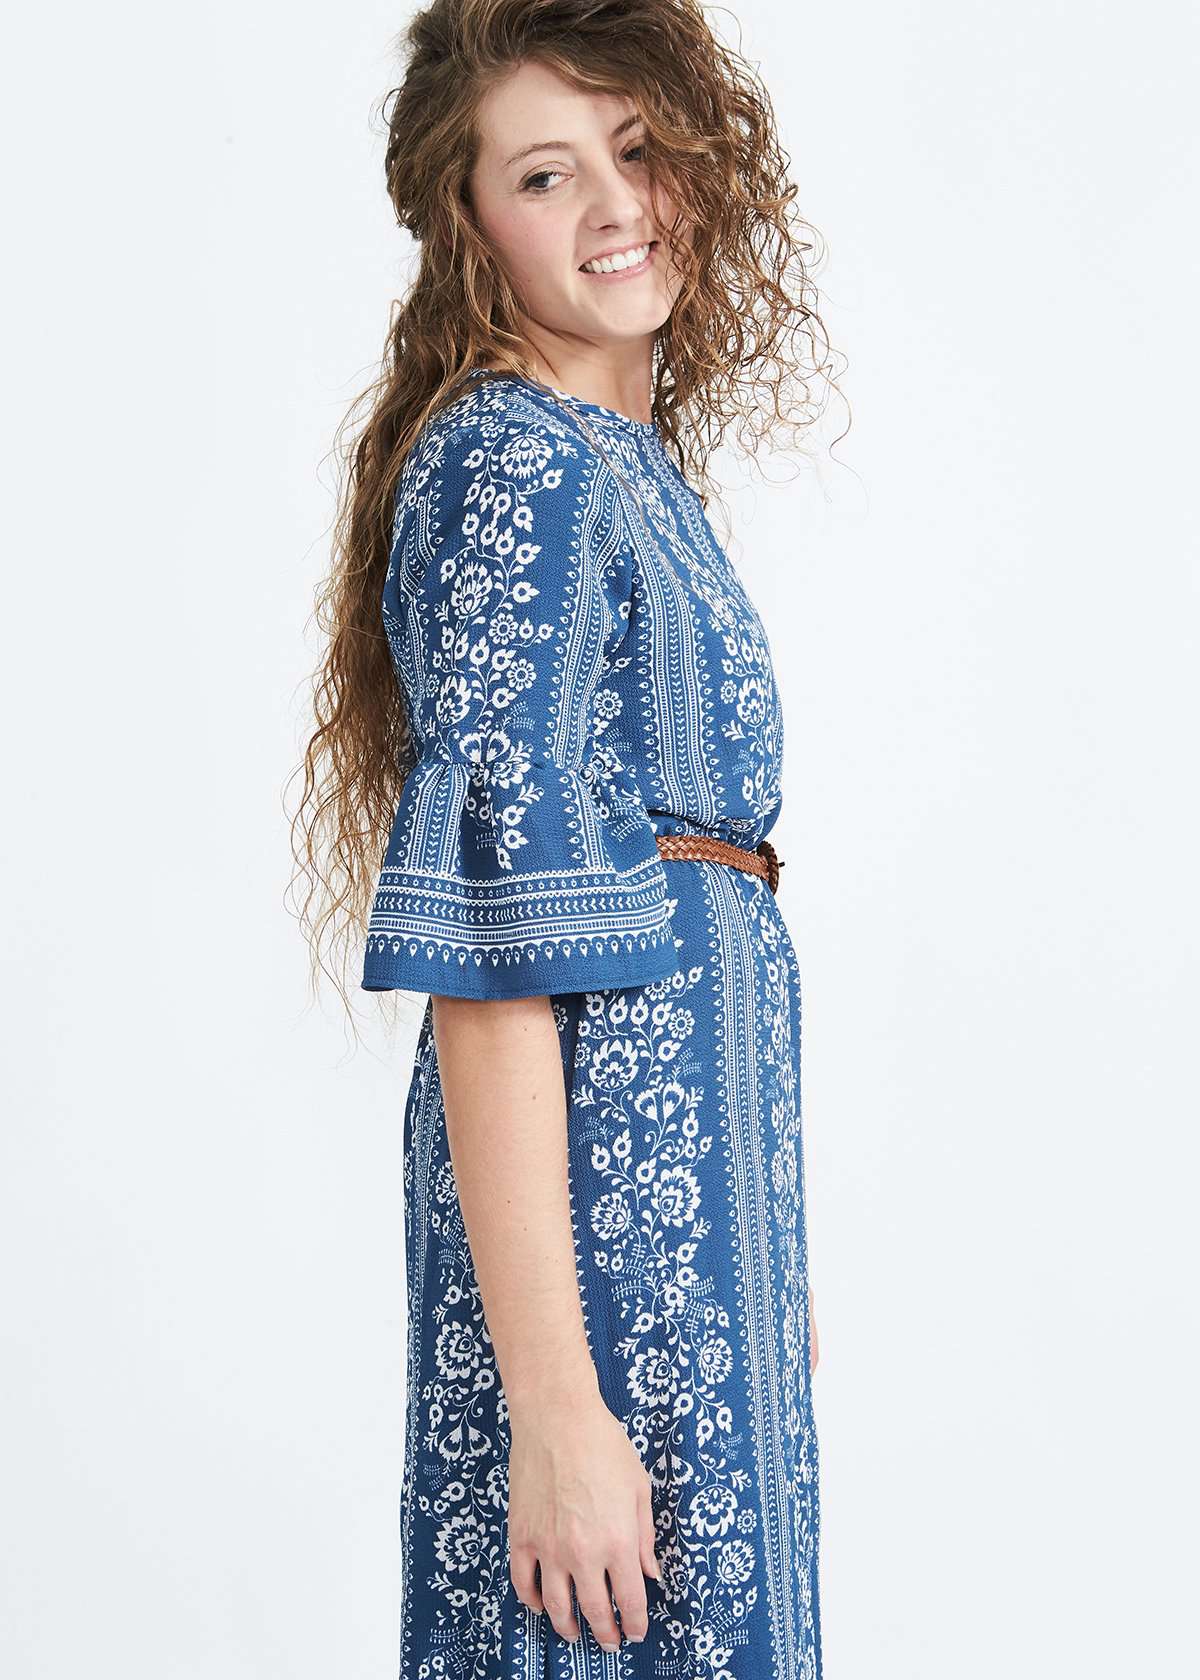 Woman wearing a long bohemian style blue dress with white accent designs and 3/4 trumpet style sleeves.